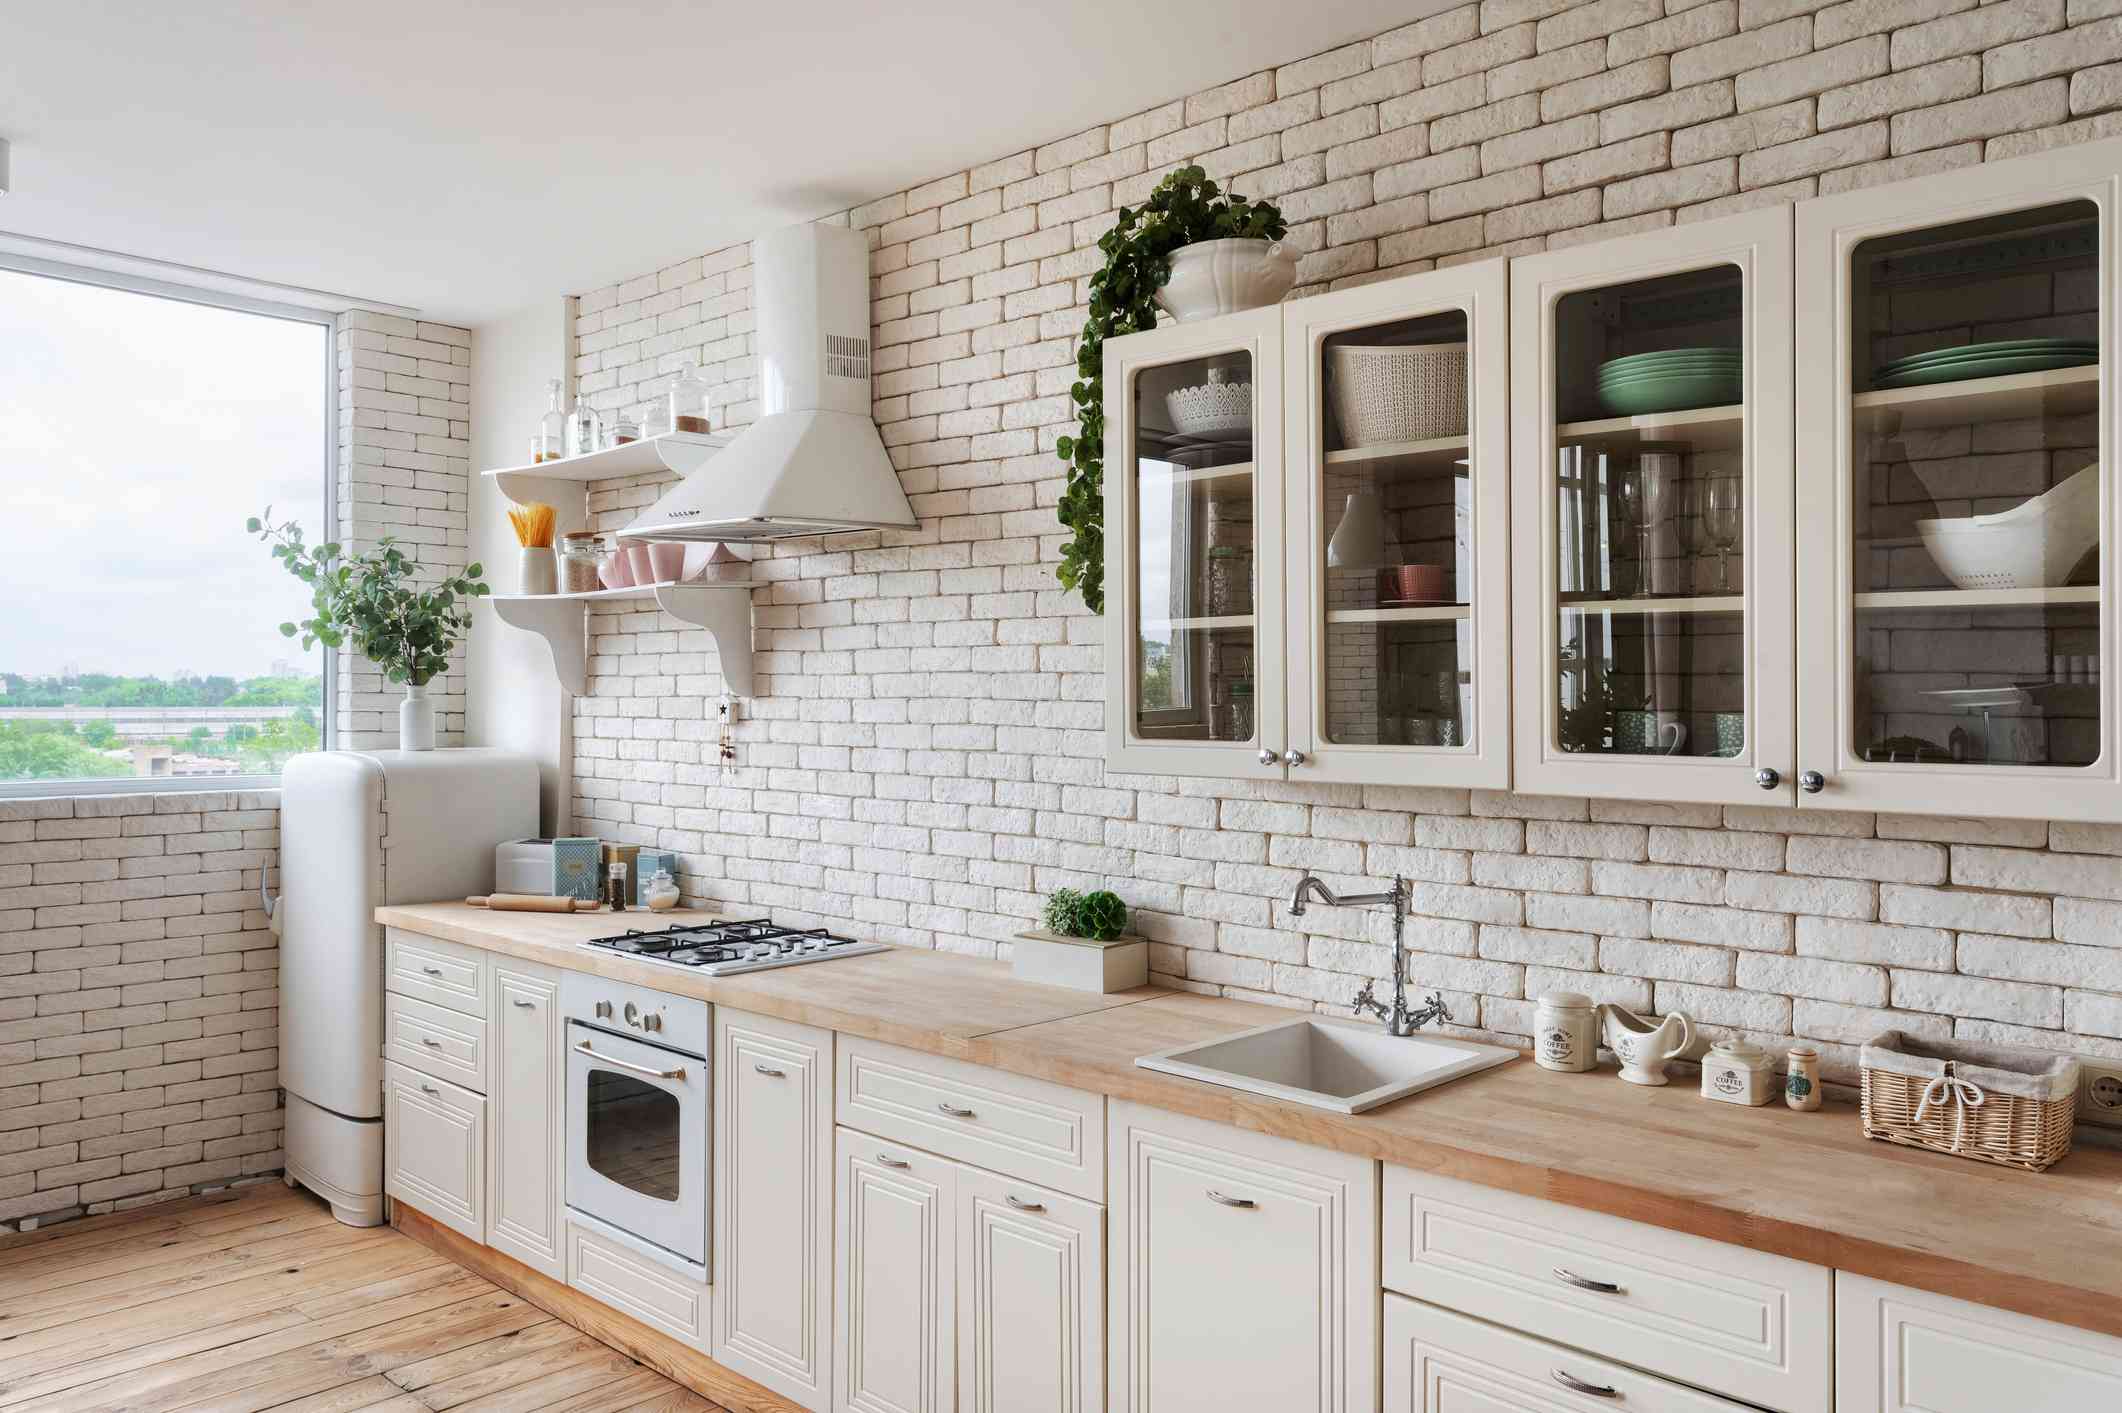 How to Find the Best Cabinets for Your Kitchen Remodeling Needs